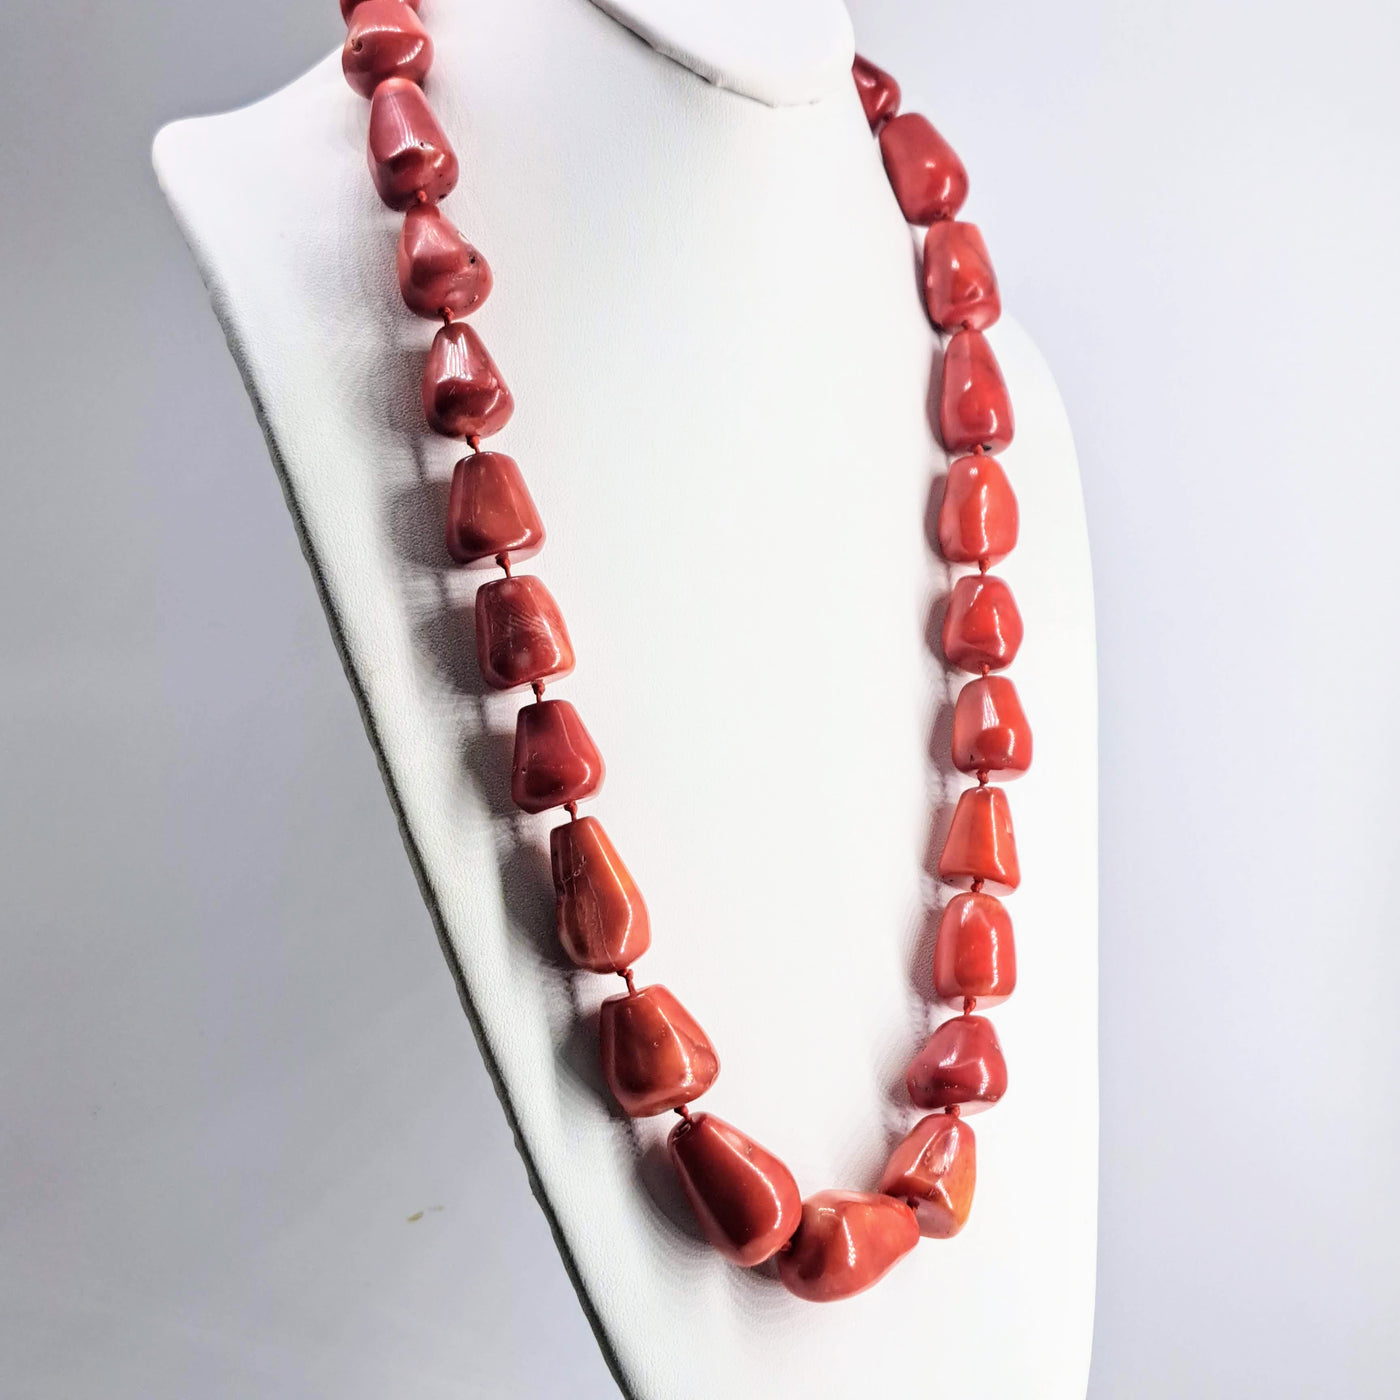 "Big Bamboo" 30" Necklace - Bamboo Coral, Sterling